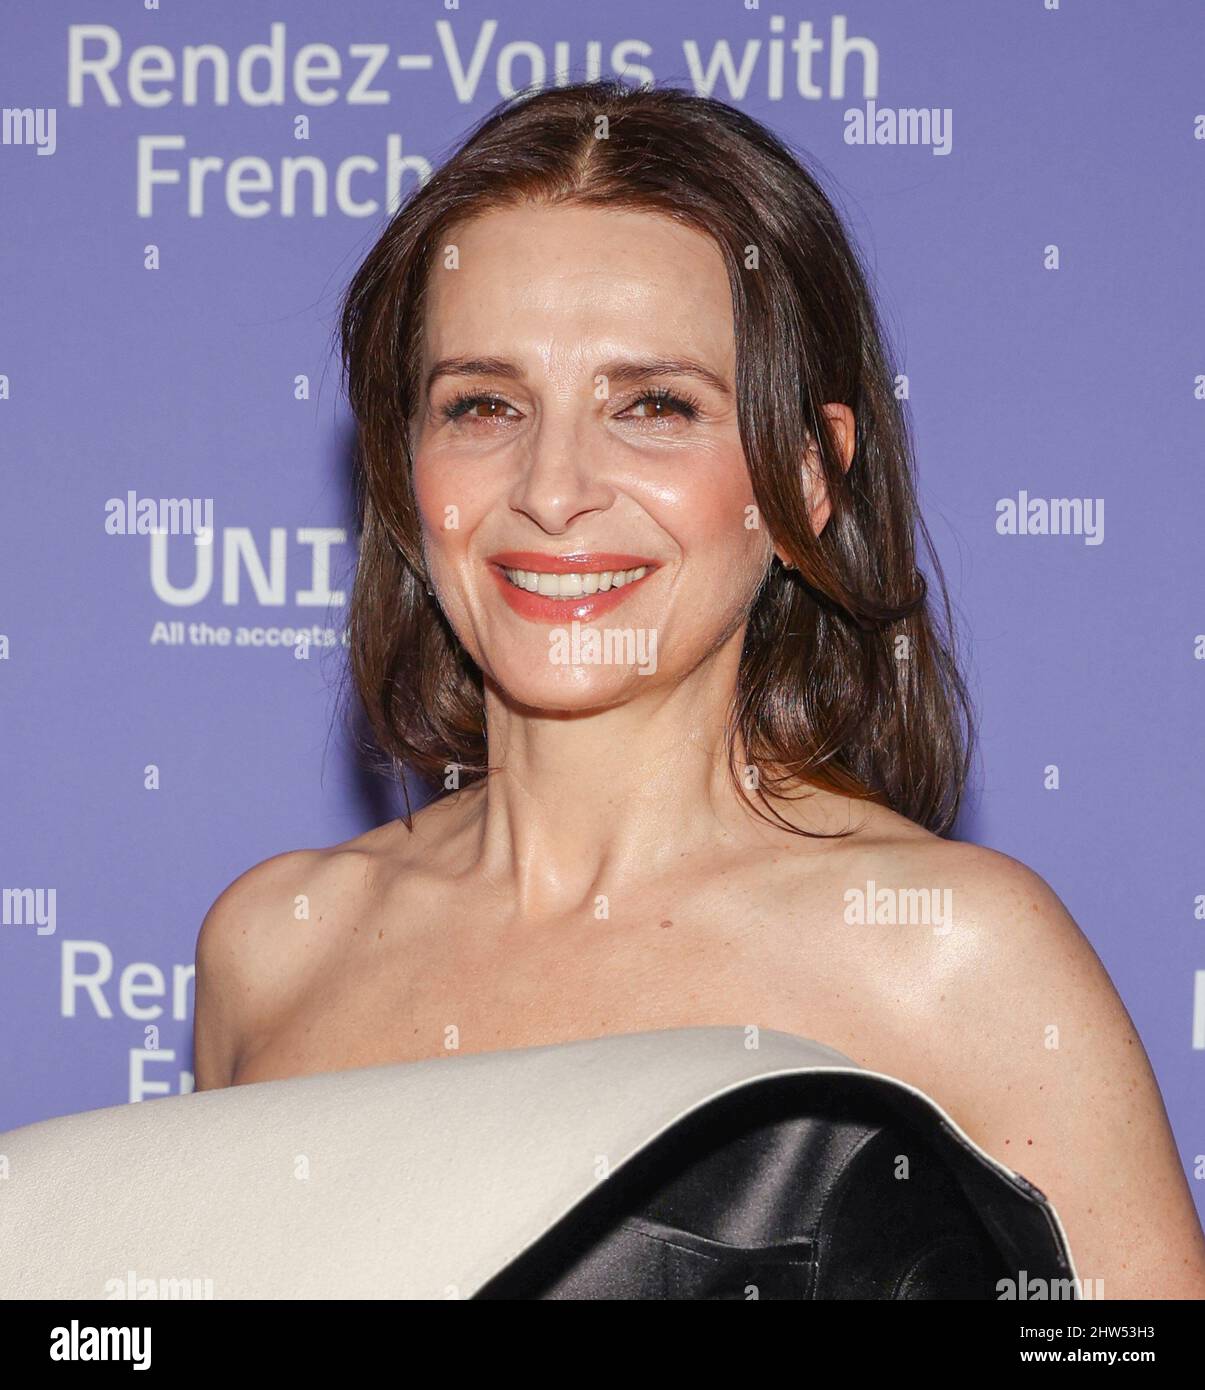 New York, NY, USA. 3rd Mar, 2022. Juliette Binoche at arrivals for Rendez-Vous With French Cinema's Opening Night with Claire Denis's FIRE, Film at Lincoln Center - Walter Reade Theater, New York, NY March 3, 2022. Credit: CJ Rivera/Everett Collection/Alamy Live News Stock Photo